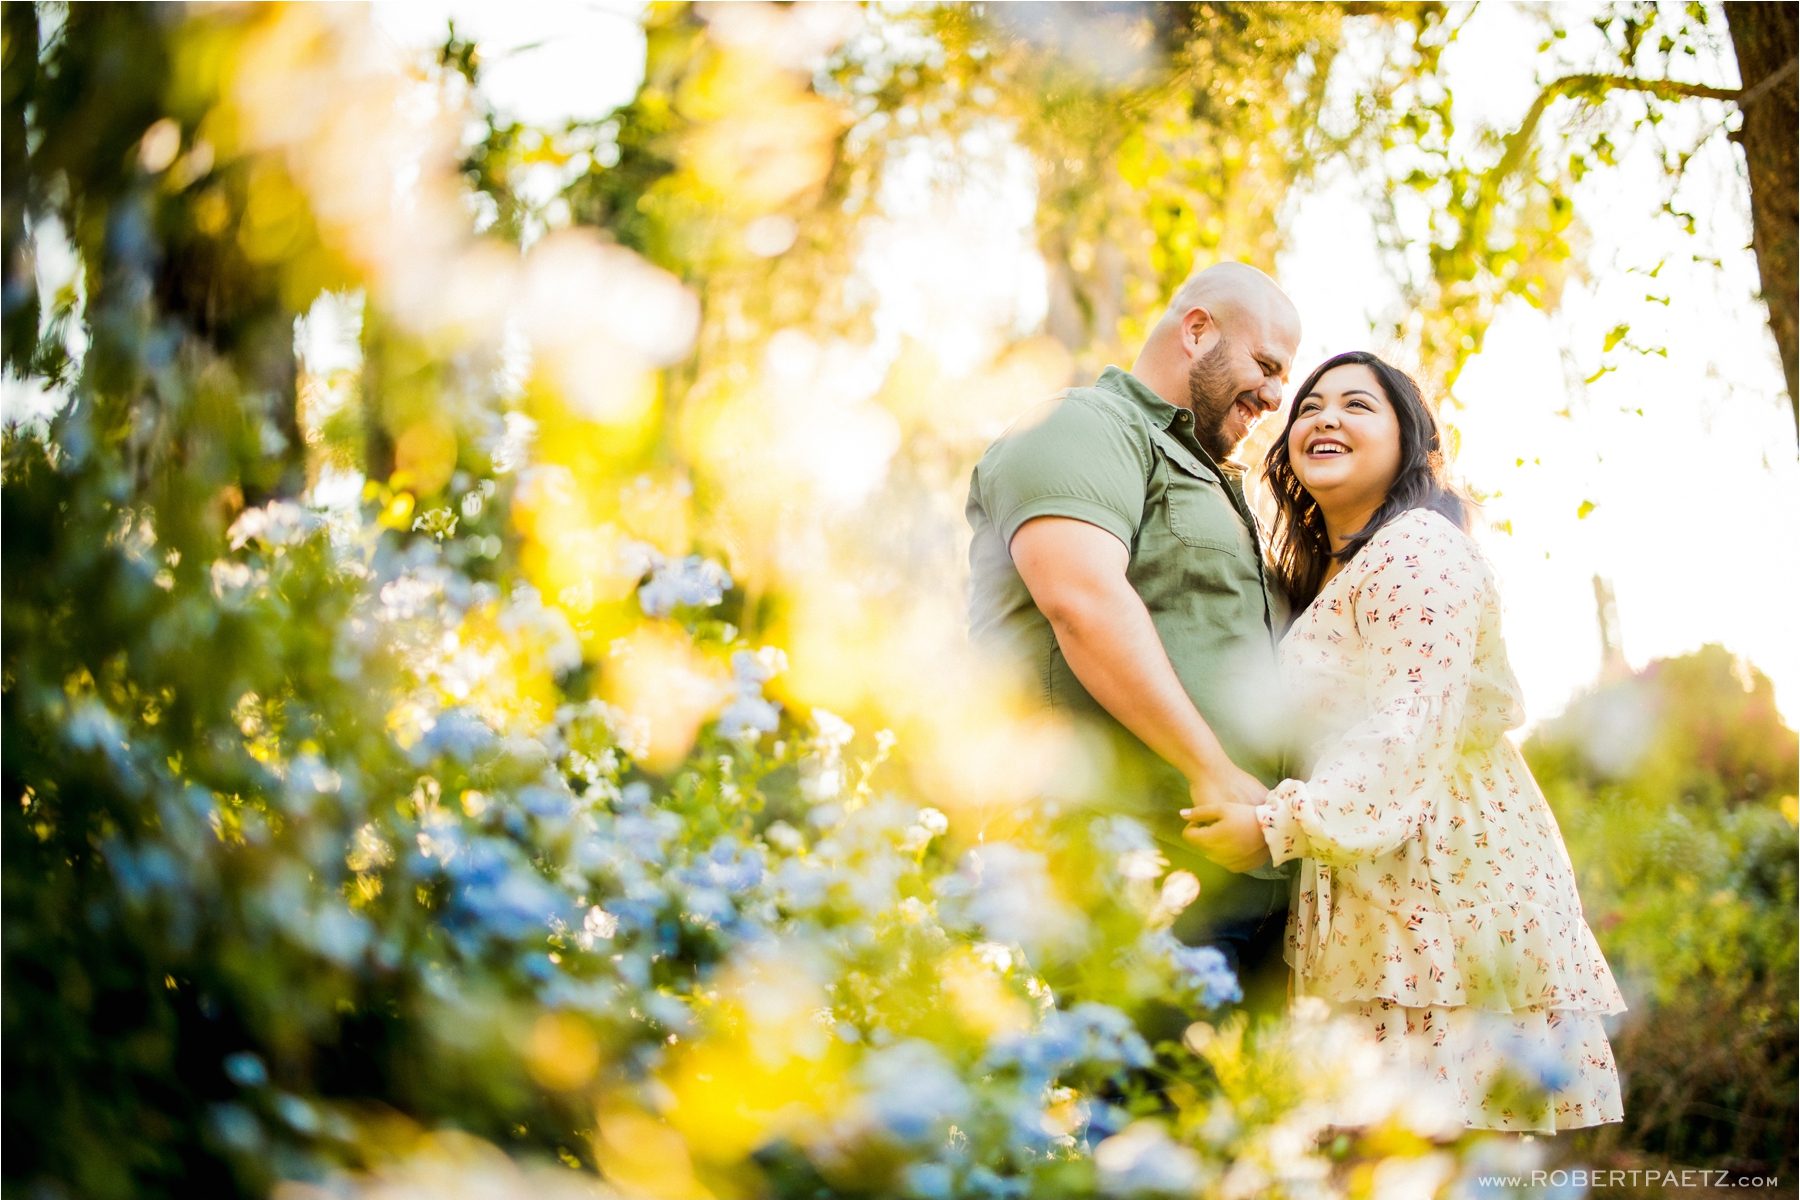 Engagement photography session taking place at the California Citrus State Historic Park in Riverside, California. The session was photographed by the destination wedding photographer, Robert Paetz.